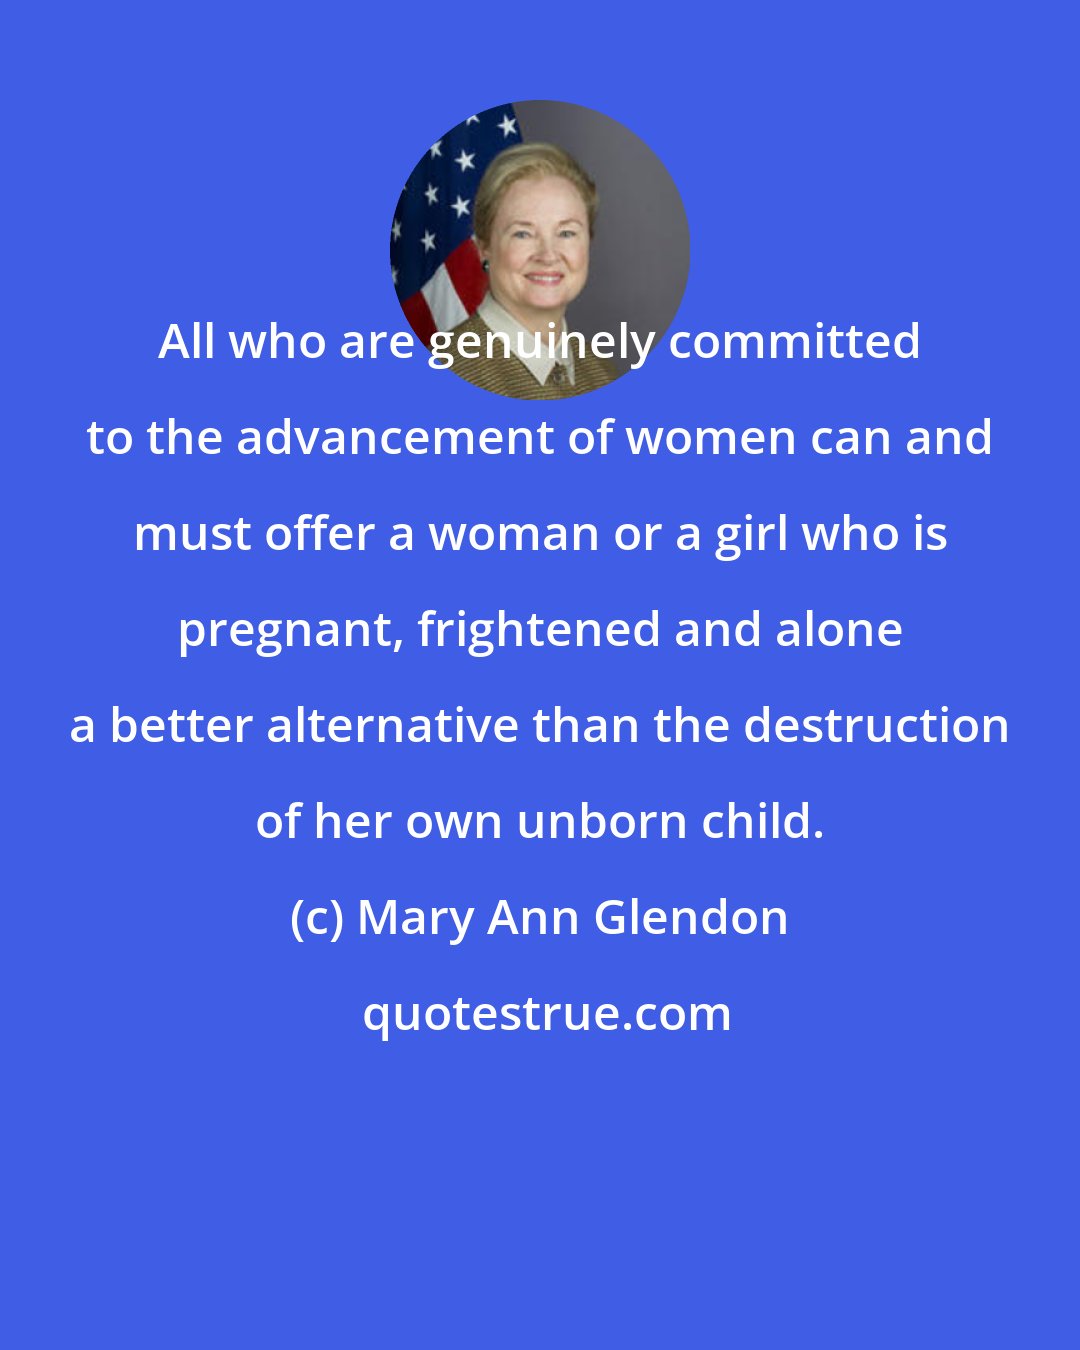 Mary Ann Glendon: All who are genuinely committed to the advancement of women can and must offer a woman or a girl who is pregnant, frightened and alone a better alternative than the destruction of her own unborn child.